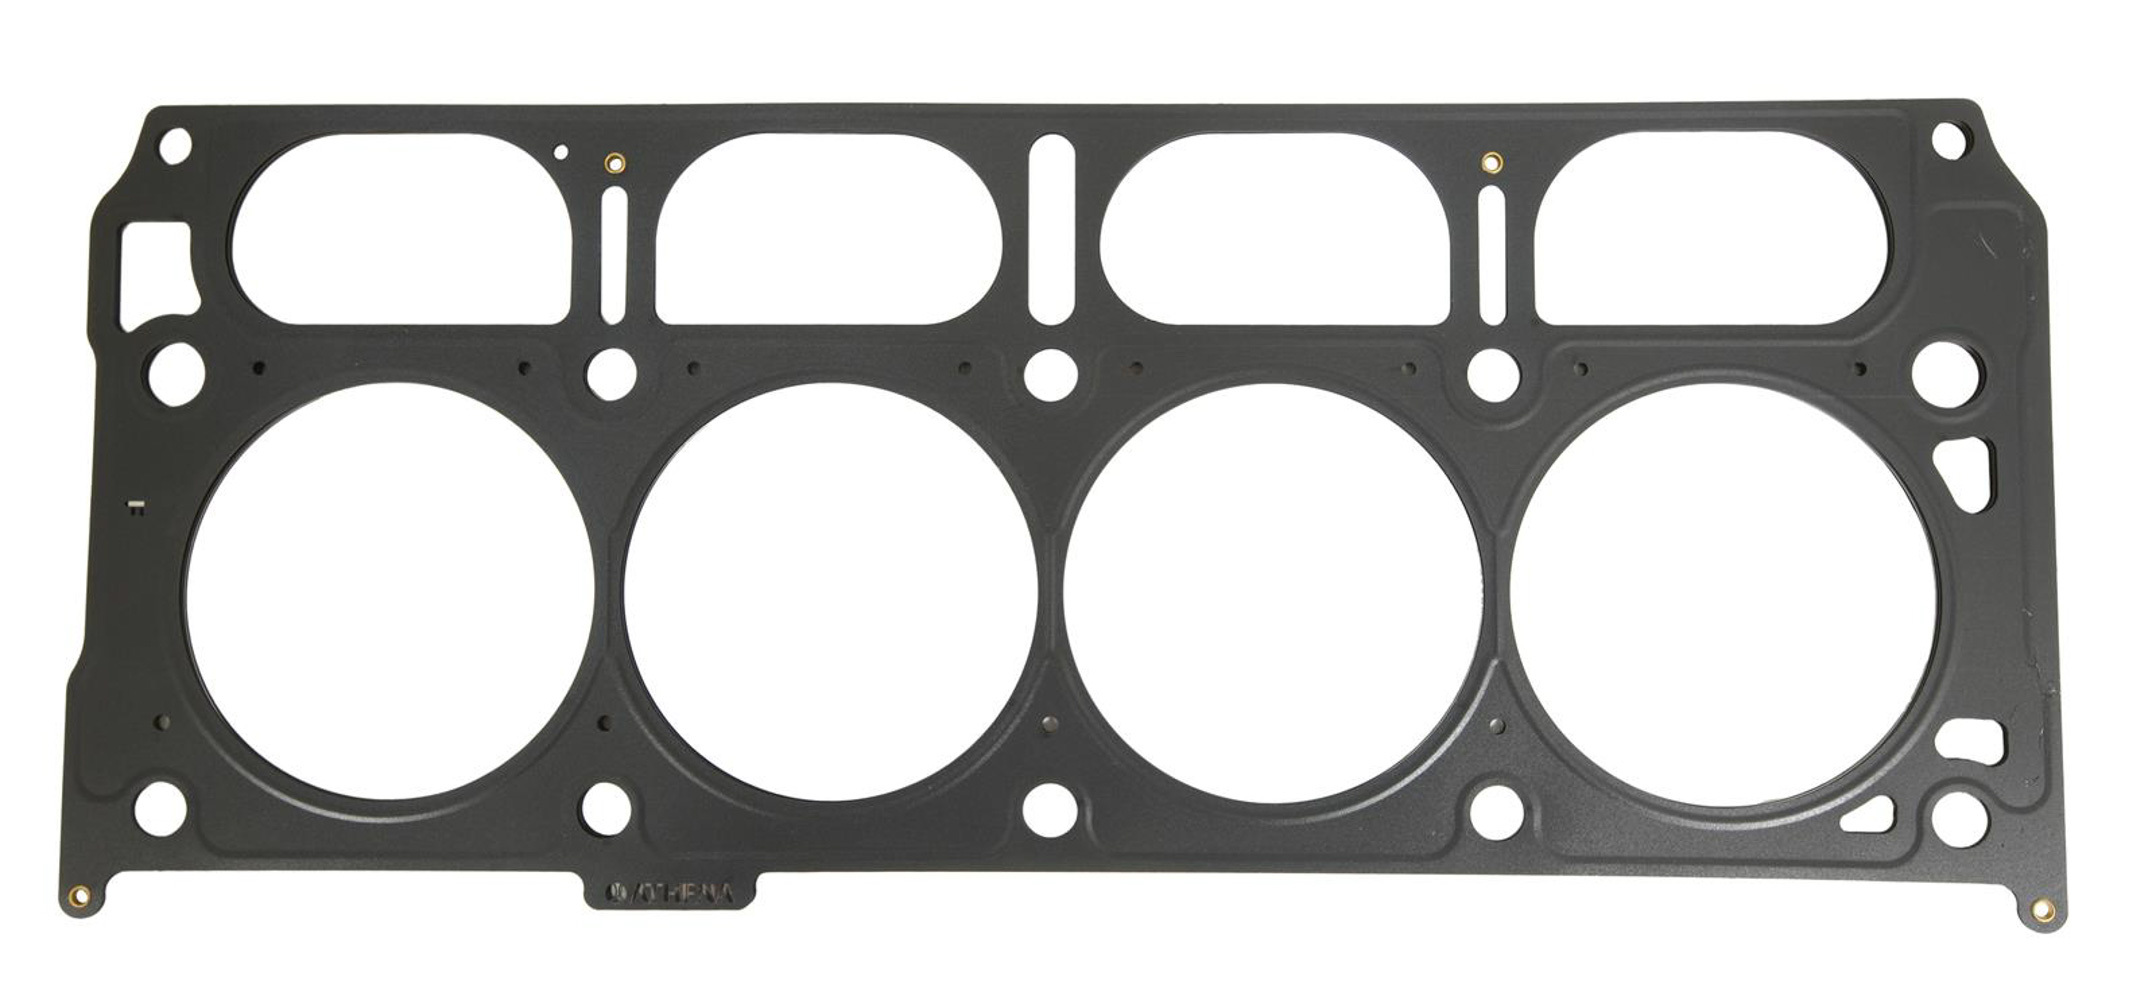 SCE Gaskets M271551GS - Cylinder Head Gasket, MLS Spartan, 4.150 in Bore, 0.051 in Compression Thickness, Multi-Layer Steel, GM LT-Series, Each